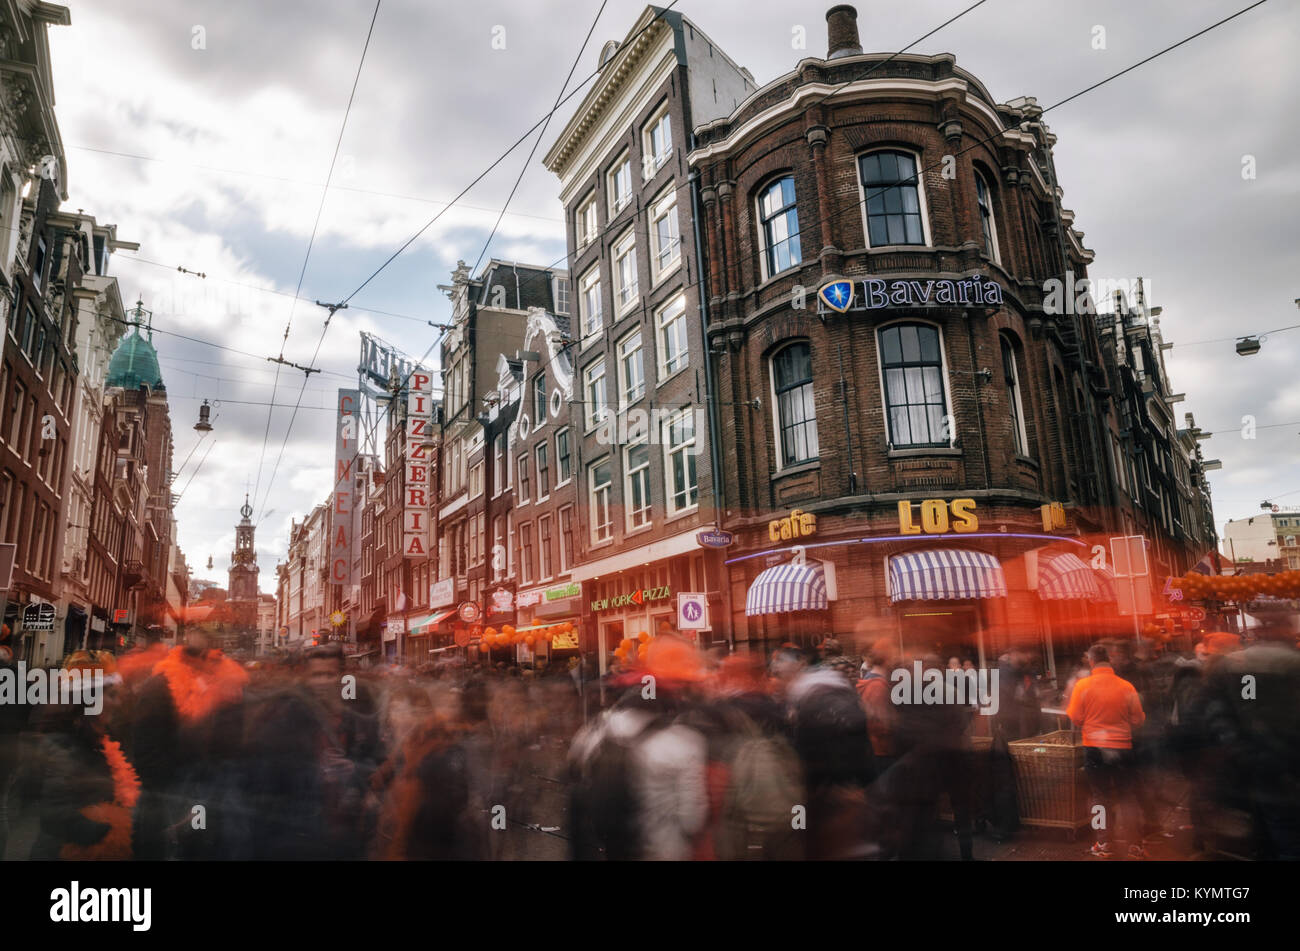 Amsterdam, Netherlands - 27 April, 2017: Streets of Amsterdam full of people in orange during the celebration of kings day with orange decorations. Stock Photo